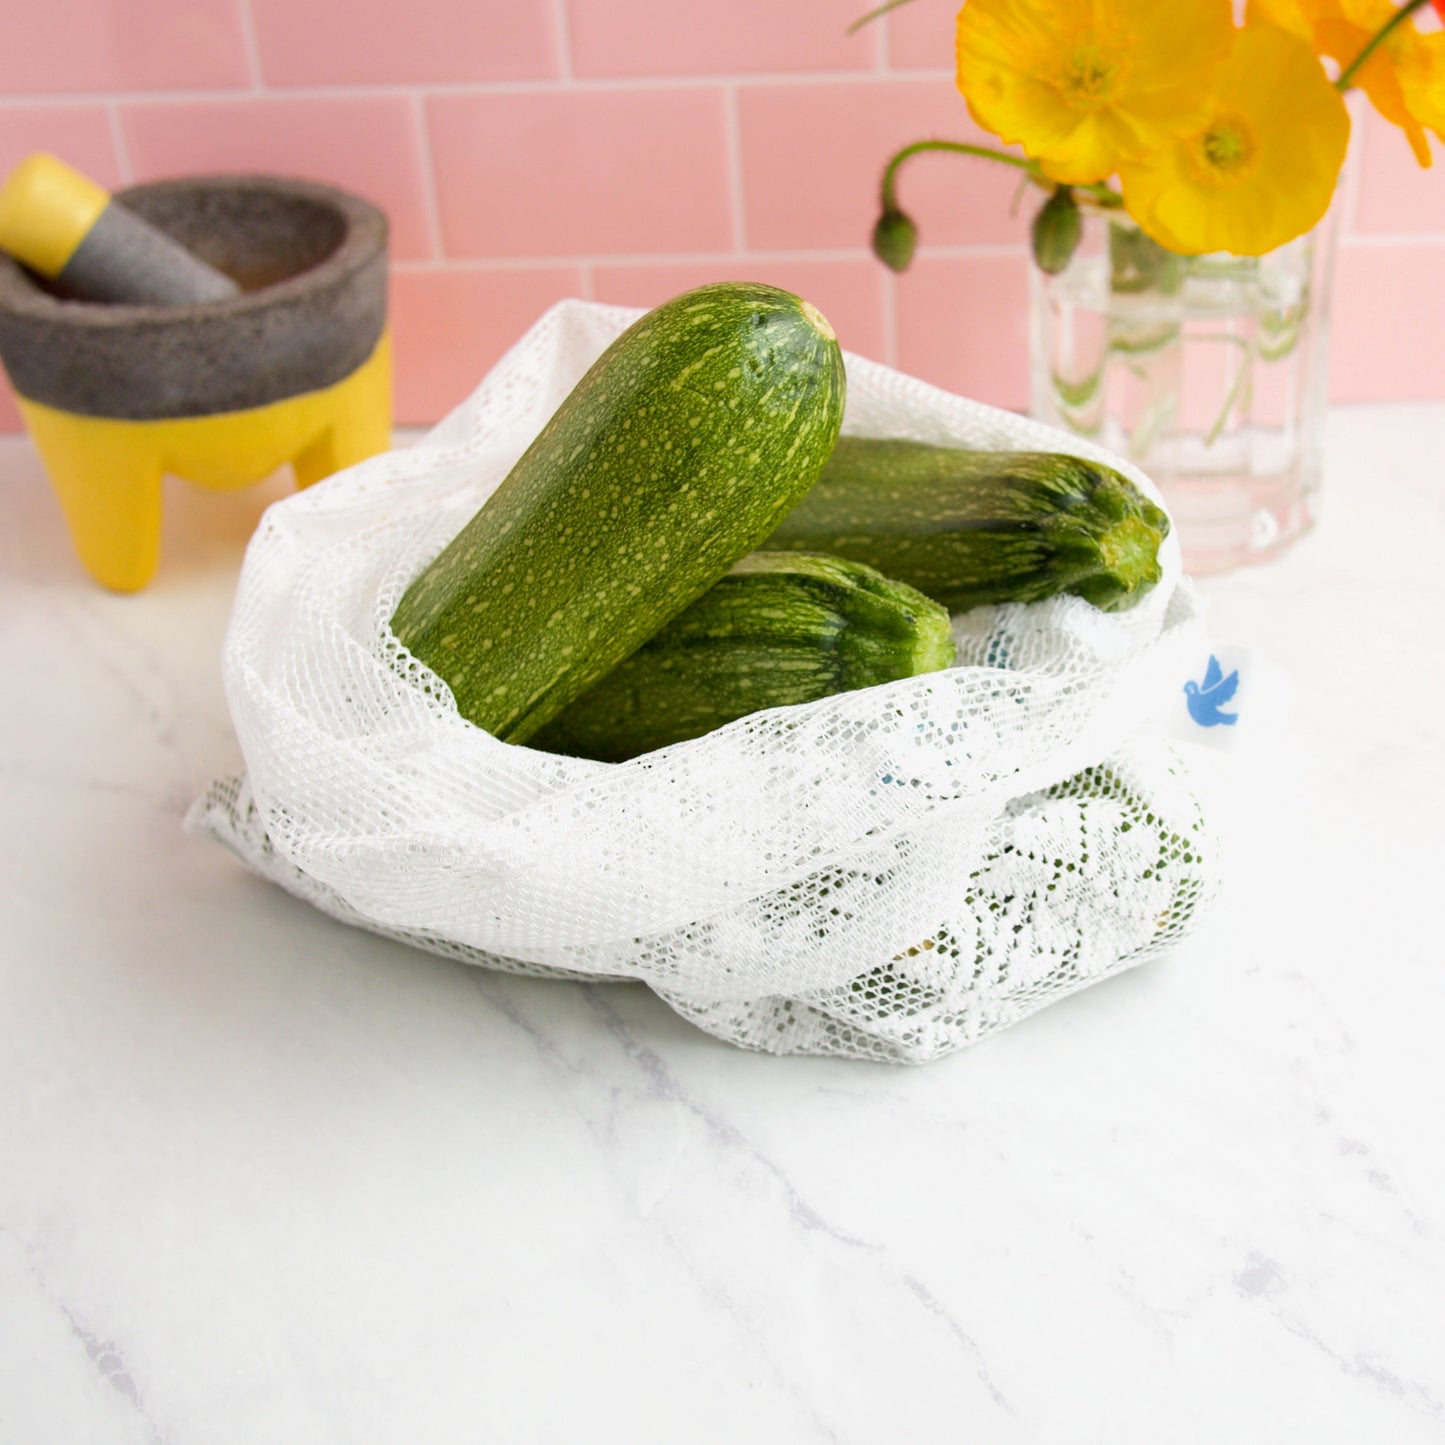 detail of reusable lace produce bag filled with zucchini